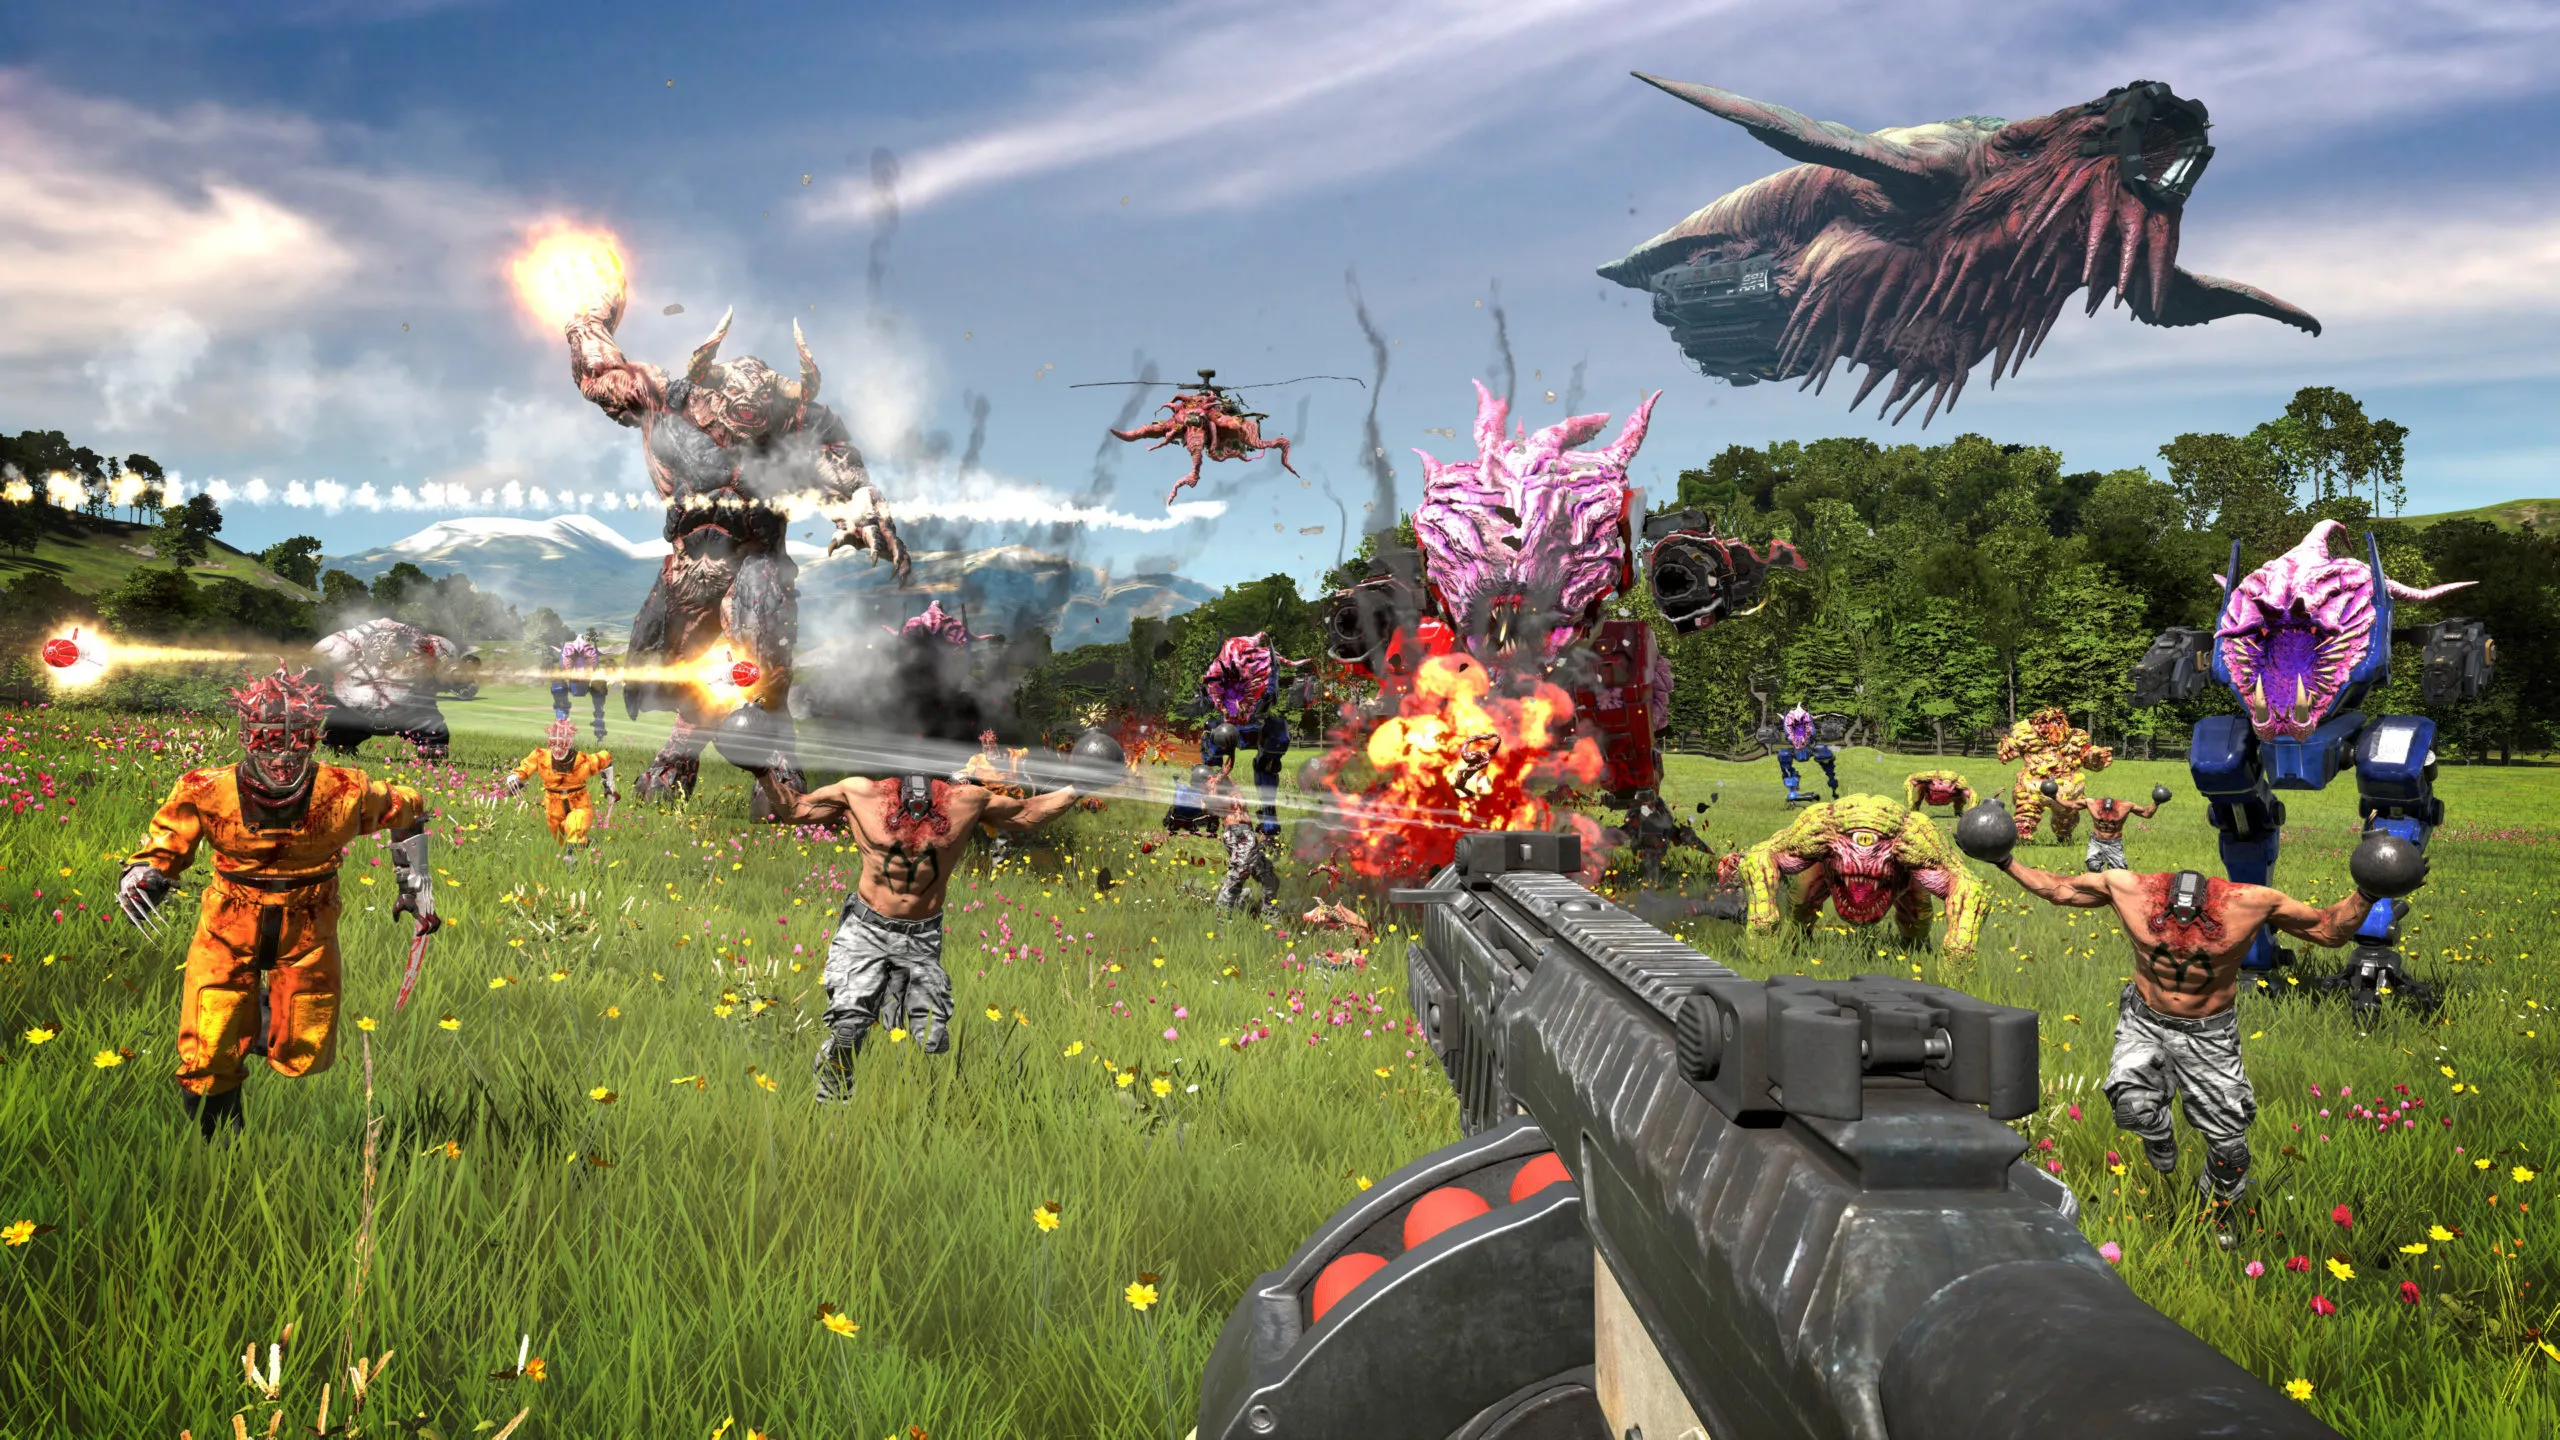 What is the release date of Serious Sam 4?